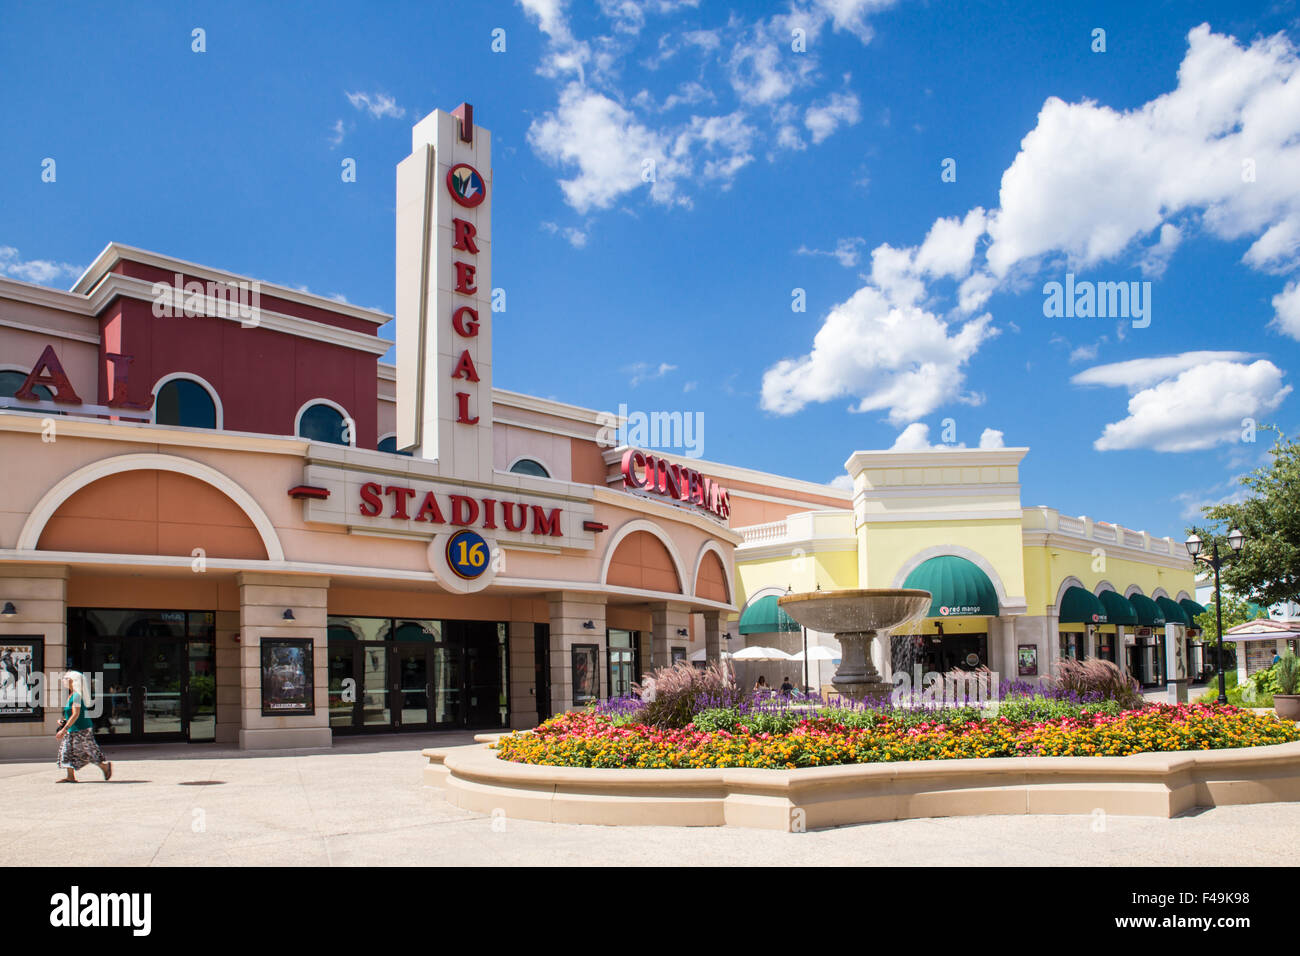 View of outdoor Tanger factory outlet mall in Deer Park, NY USA Stock Photo